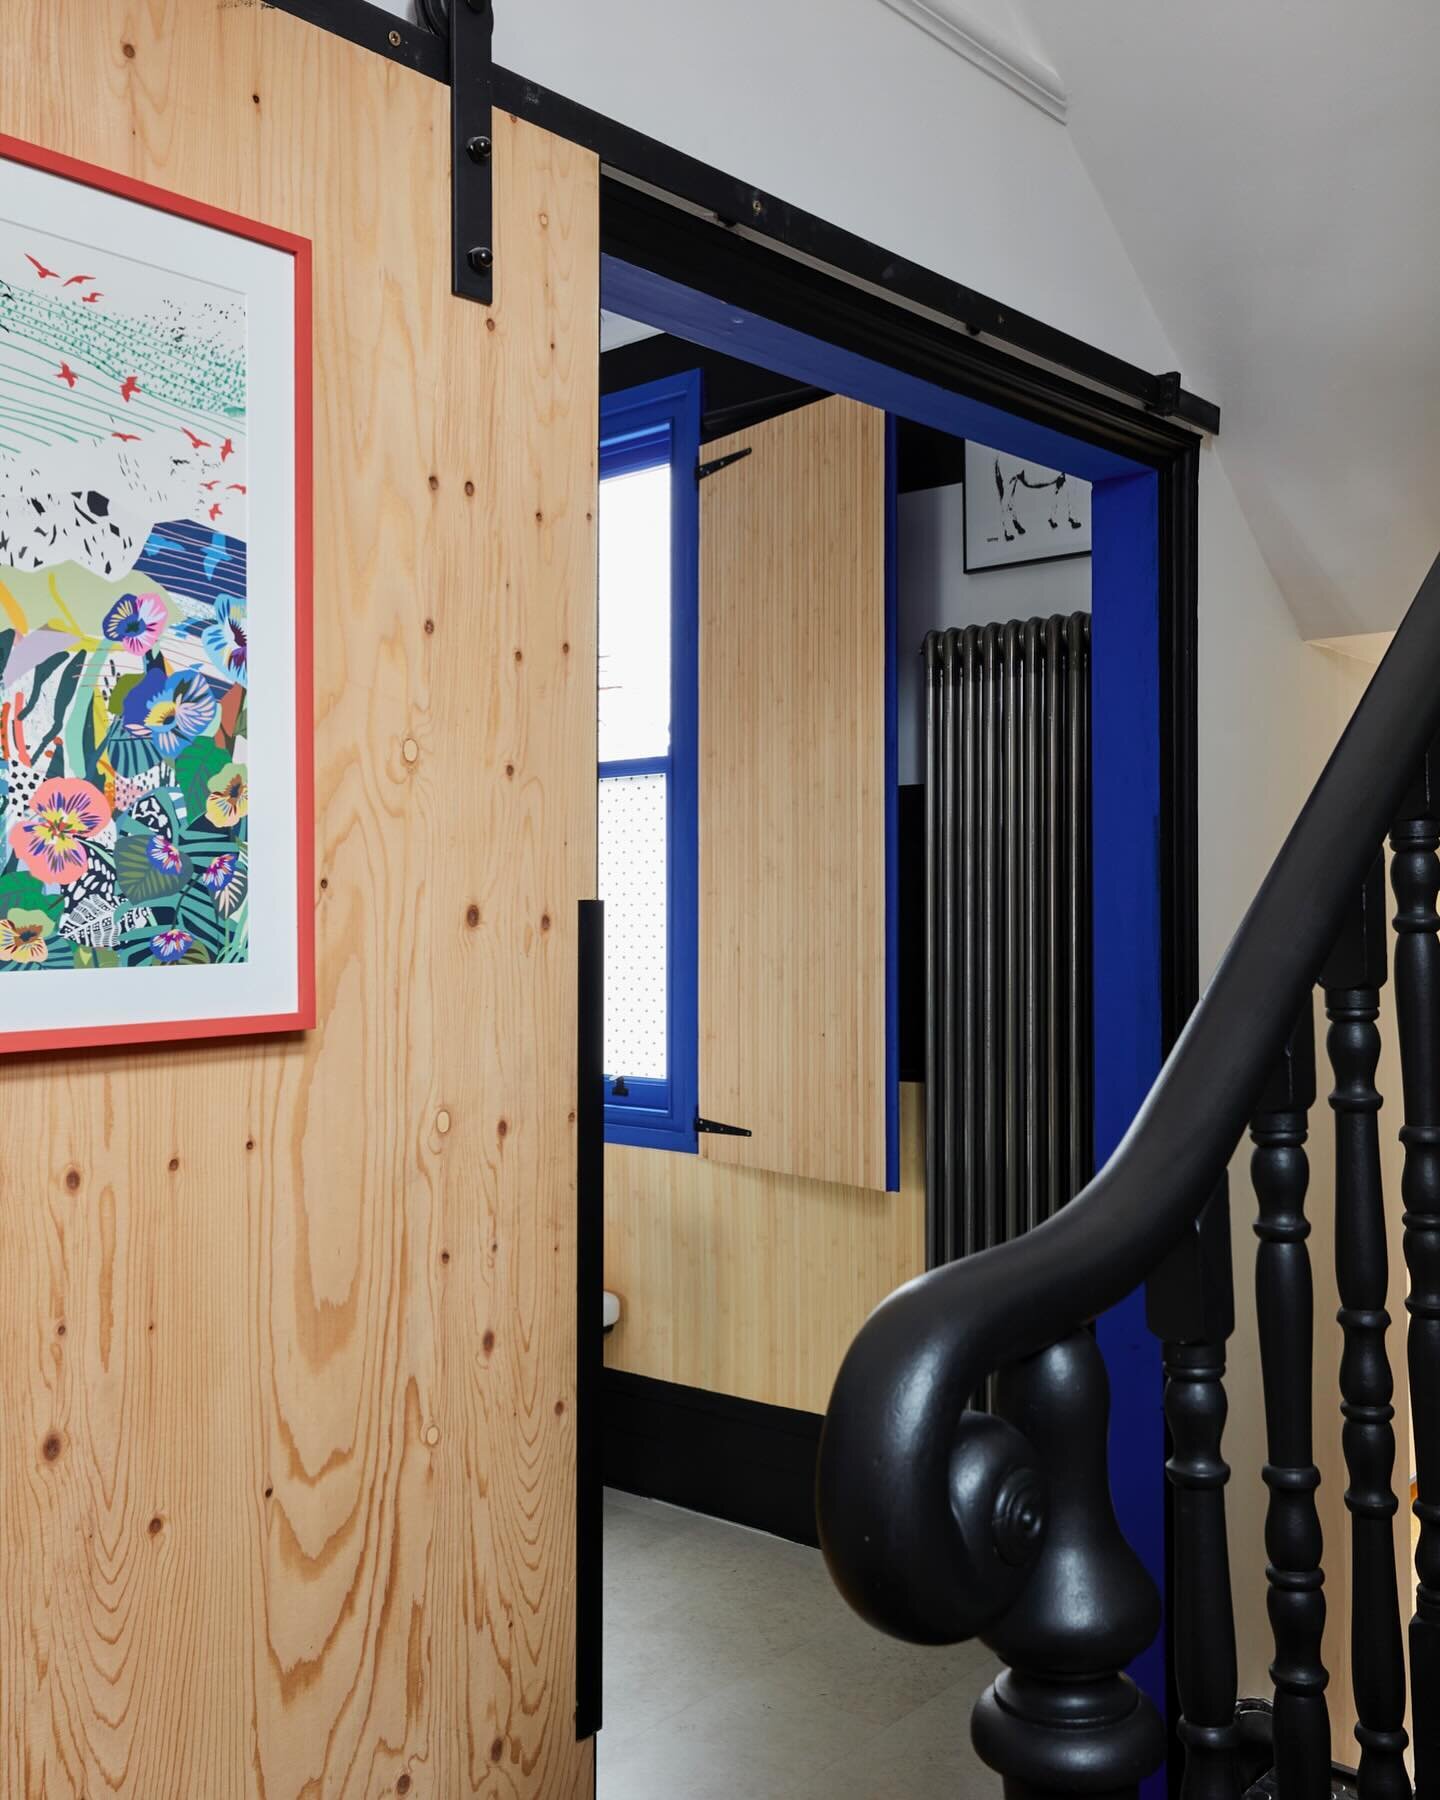 It took 3 colour changes to find the perfect @claybrookstudio Judy&rsquo;s Jewel to pair perfectly with @yes.colours Electric Blue in this entrance. 

The @kittymccall artwork on the Spruce Ply sliding barn door captures both of the colours and more,